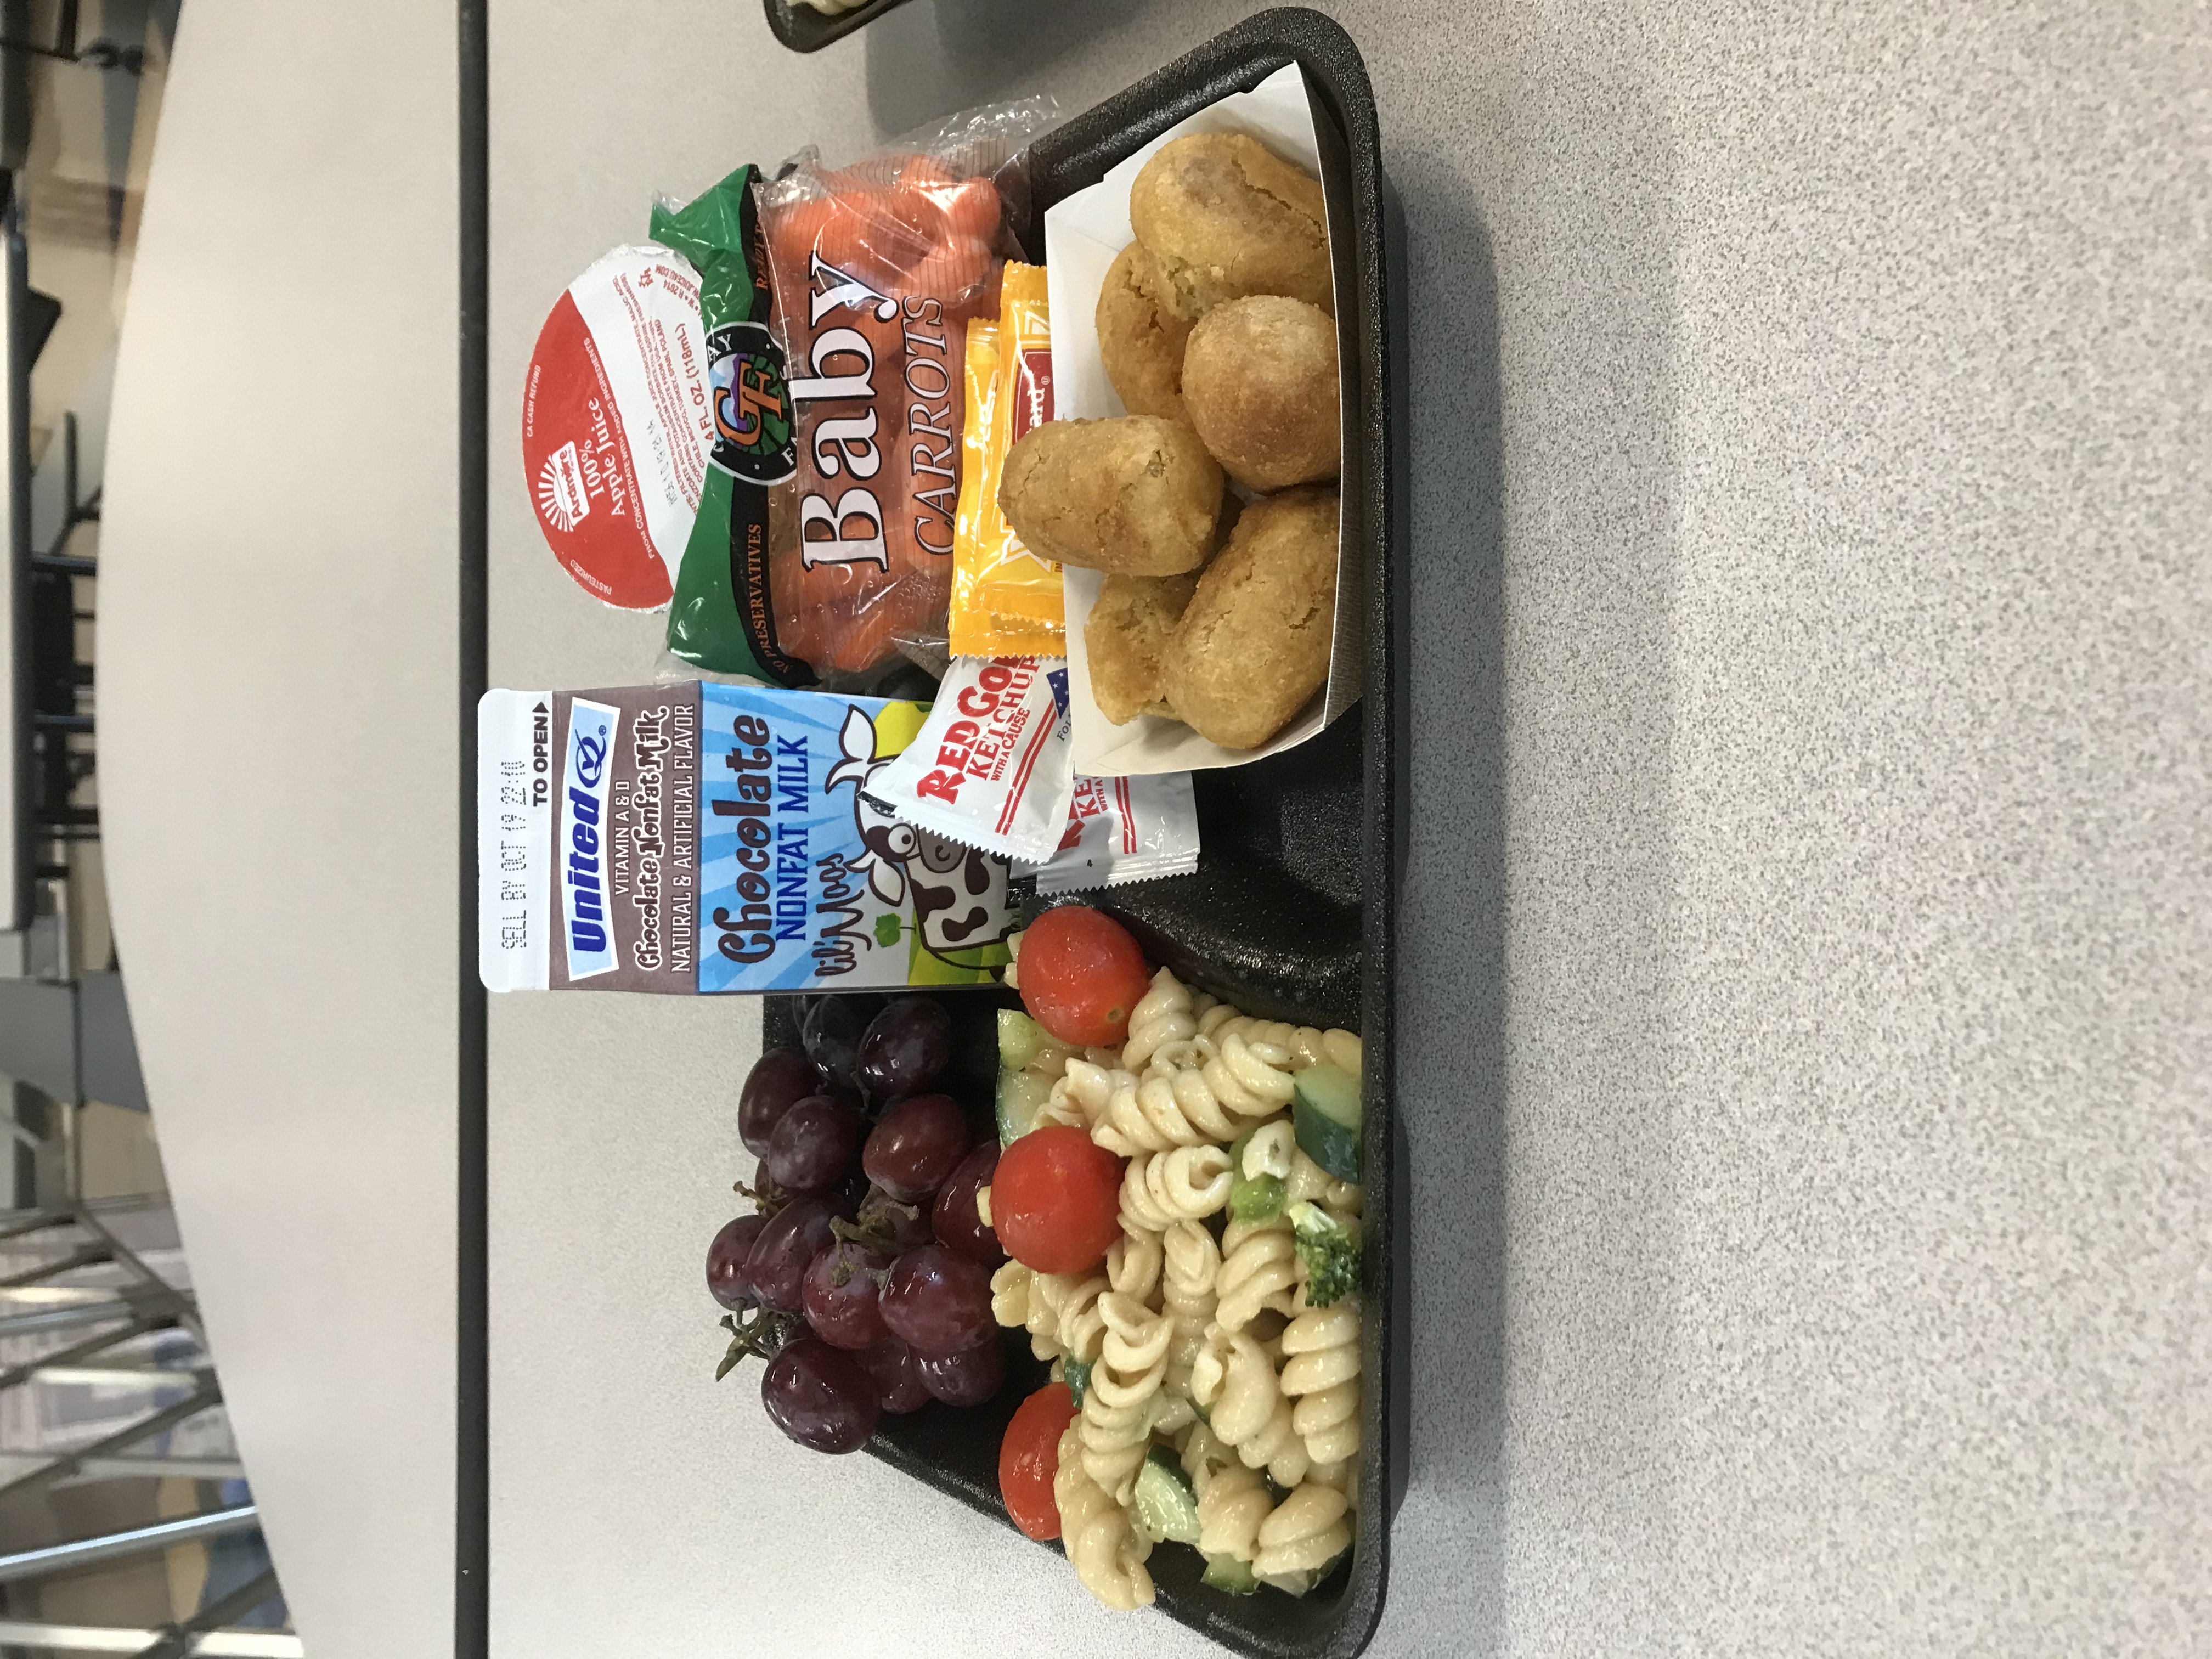 A tray of food containing mini corn dogs, pasta salad, grapes, a carton of milk, baby carrots, and yogurt.